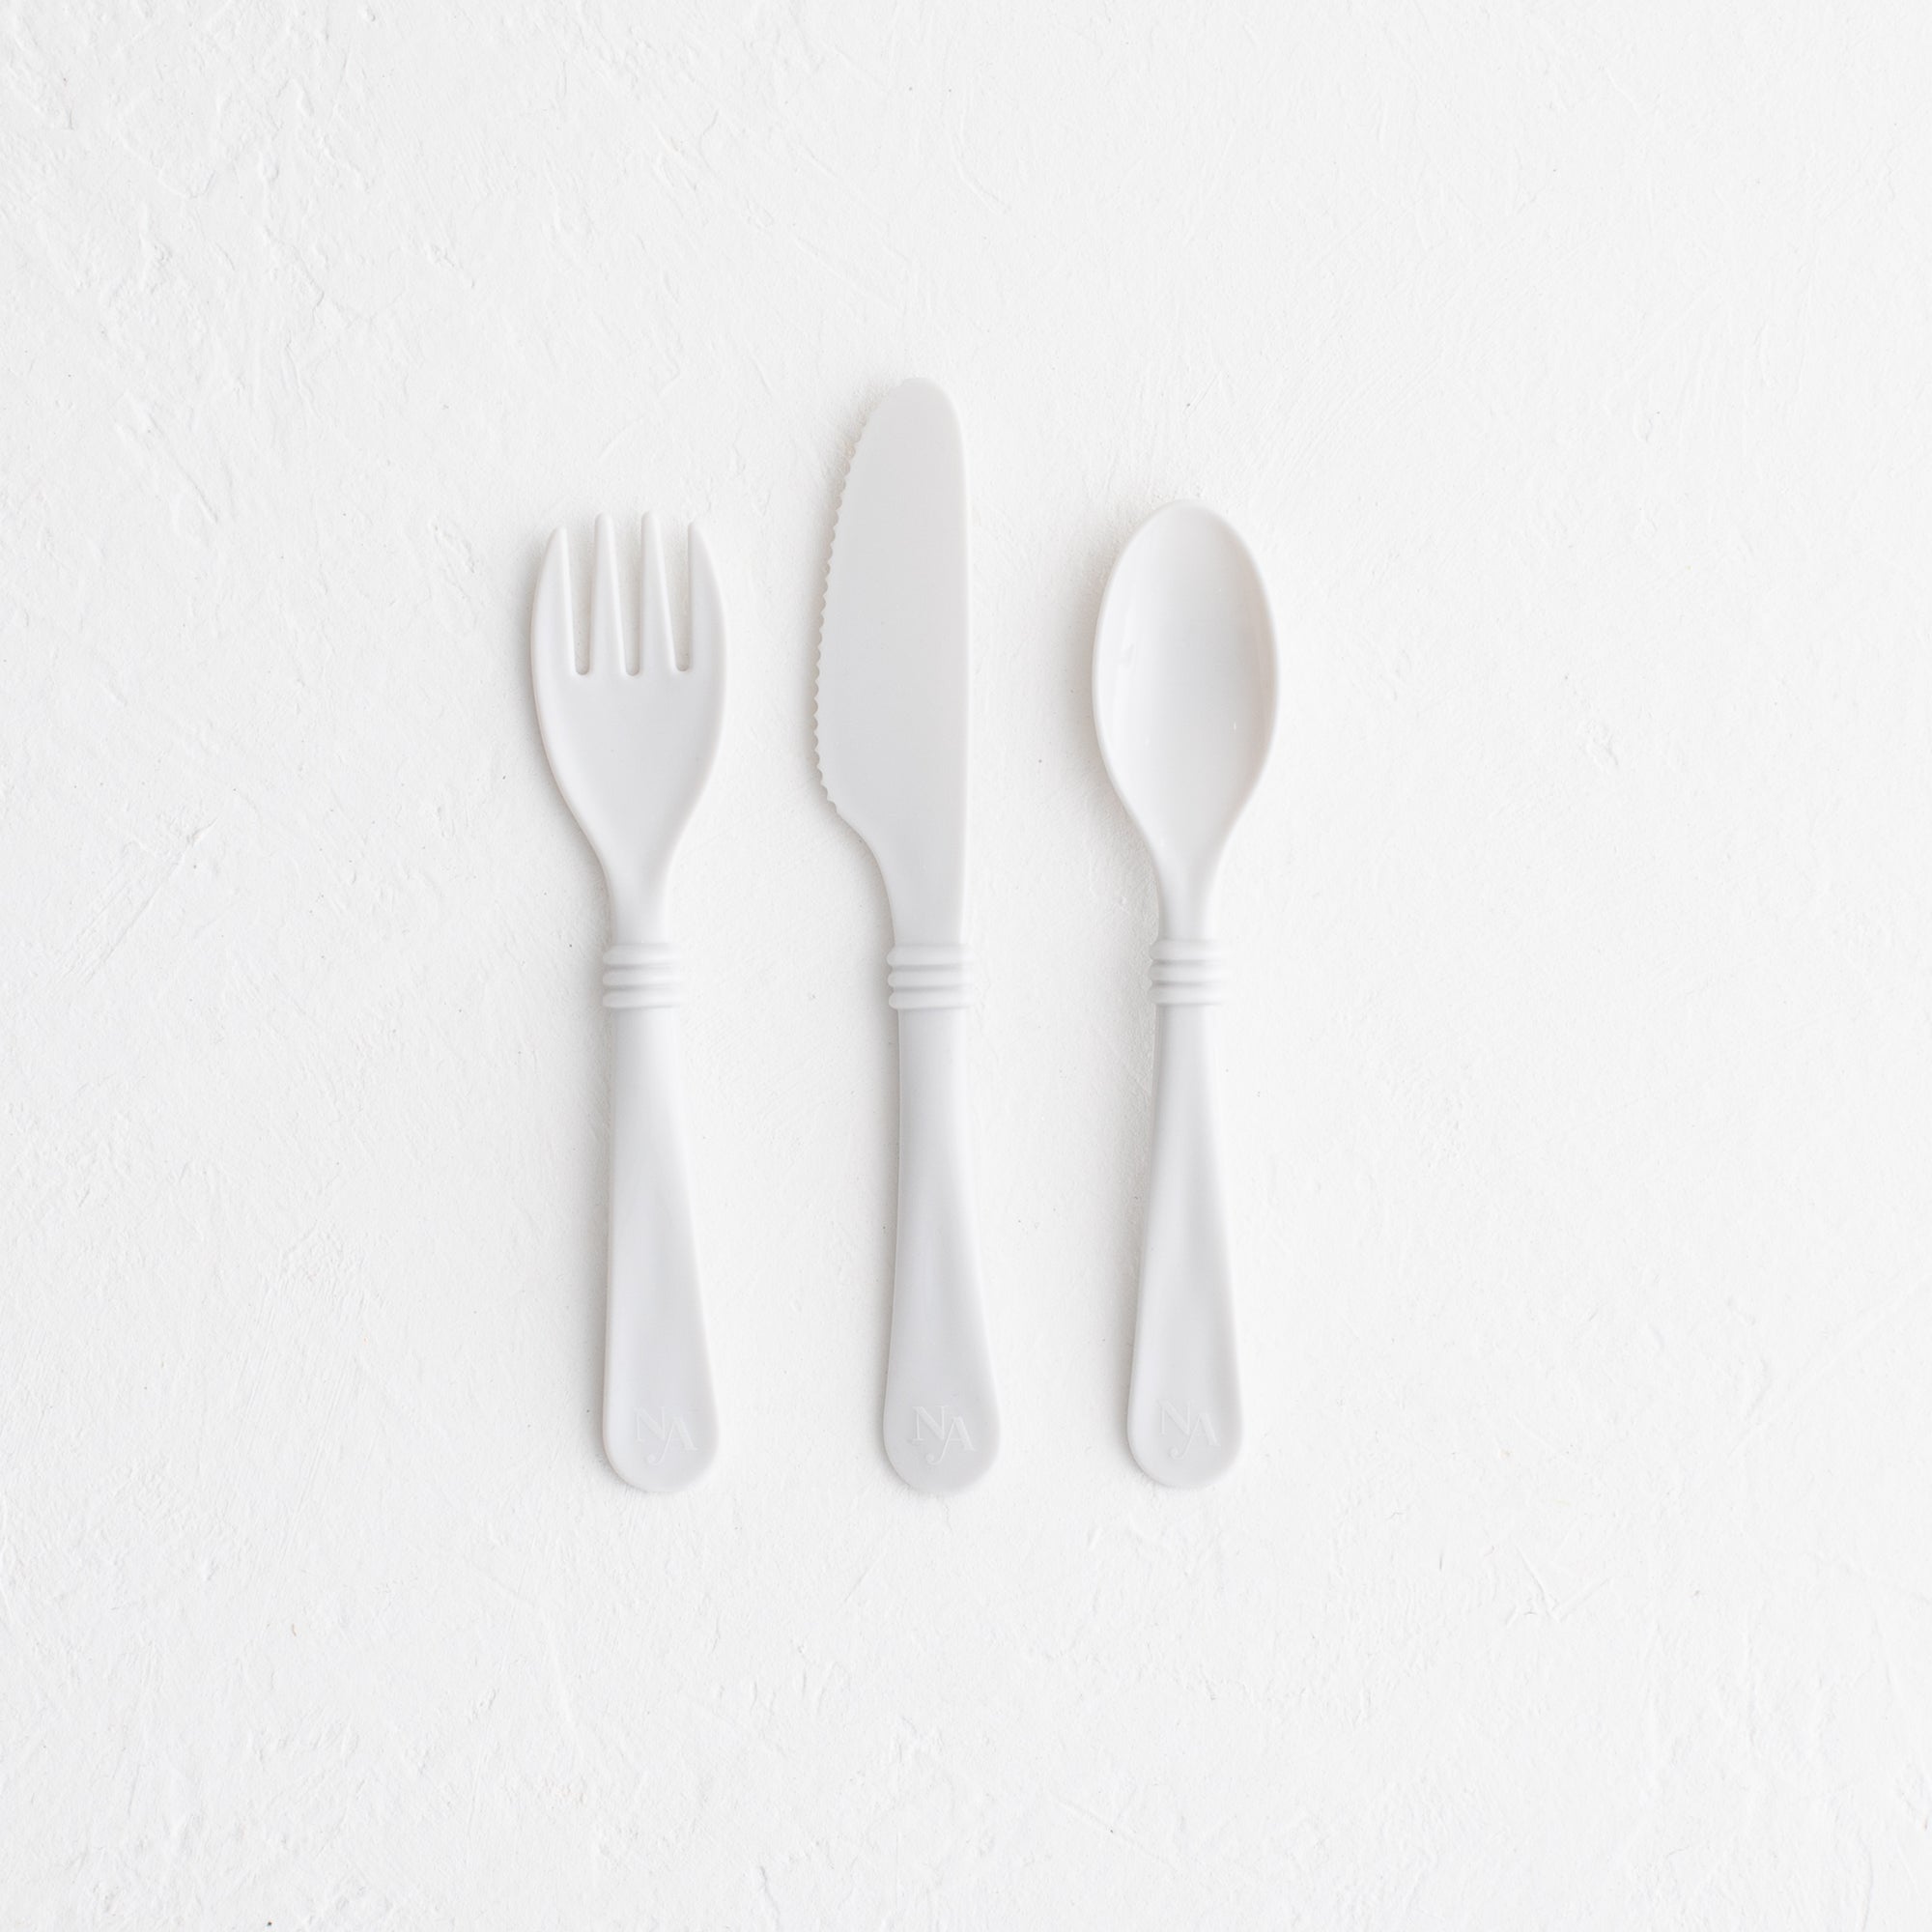 Recycled plastic cutlery set - eco-friendly utensils for sustainable dining - white set